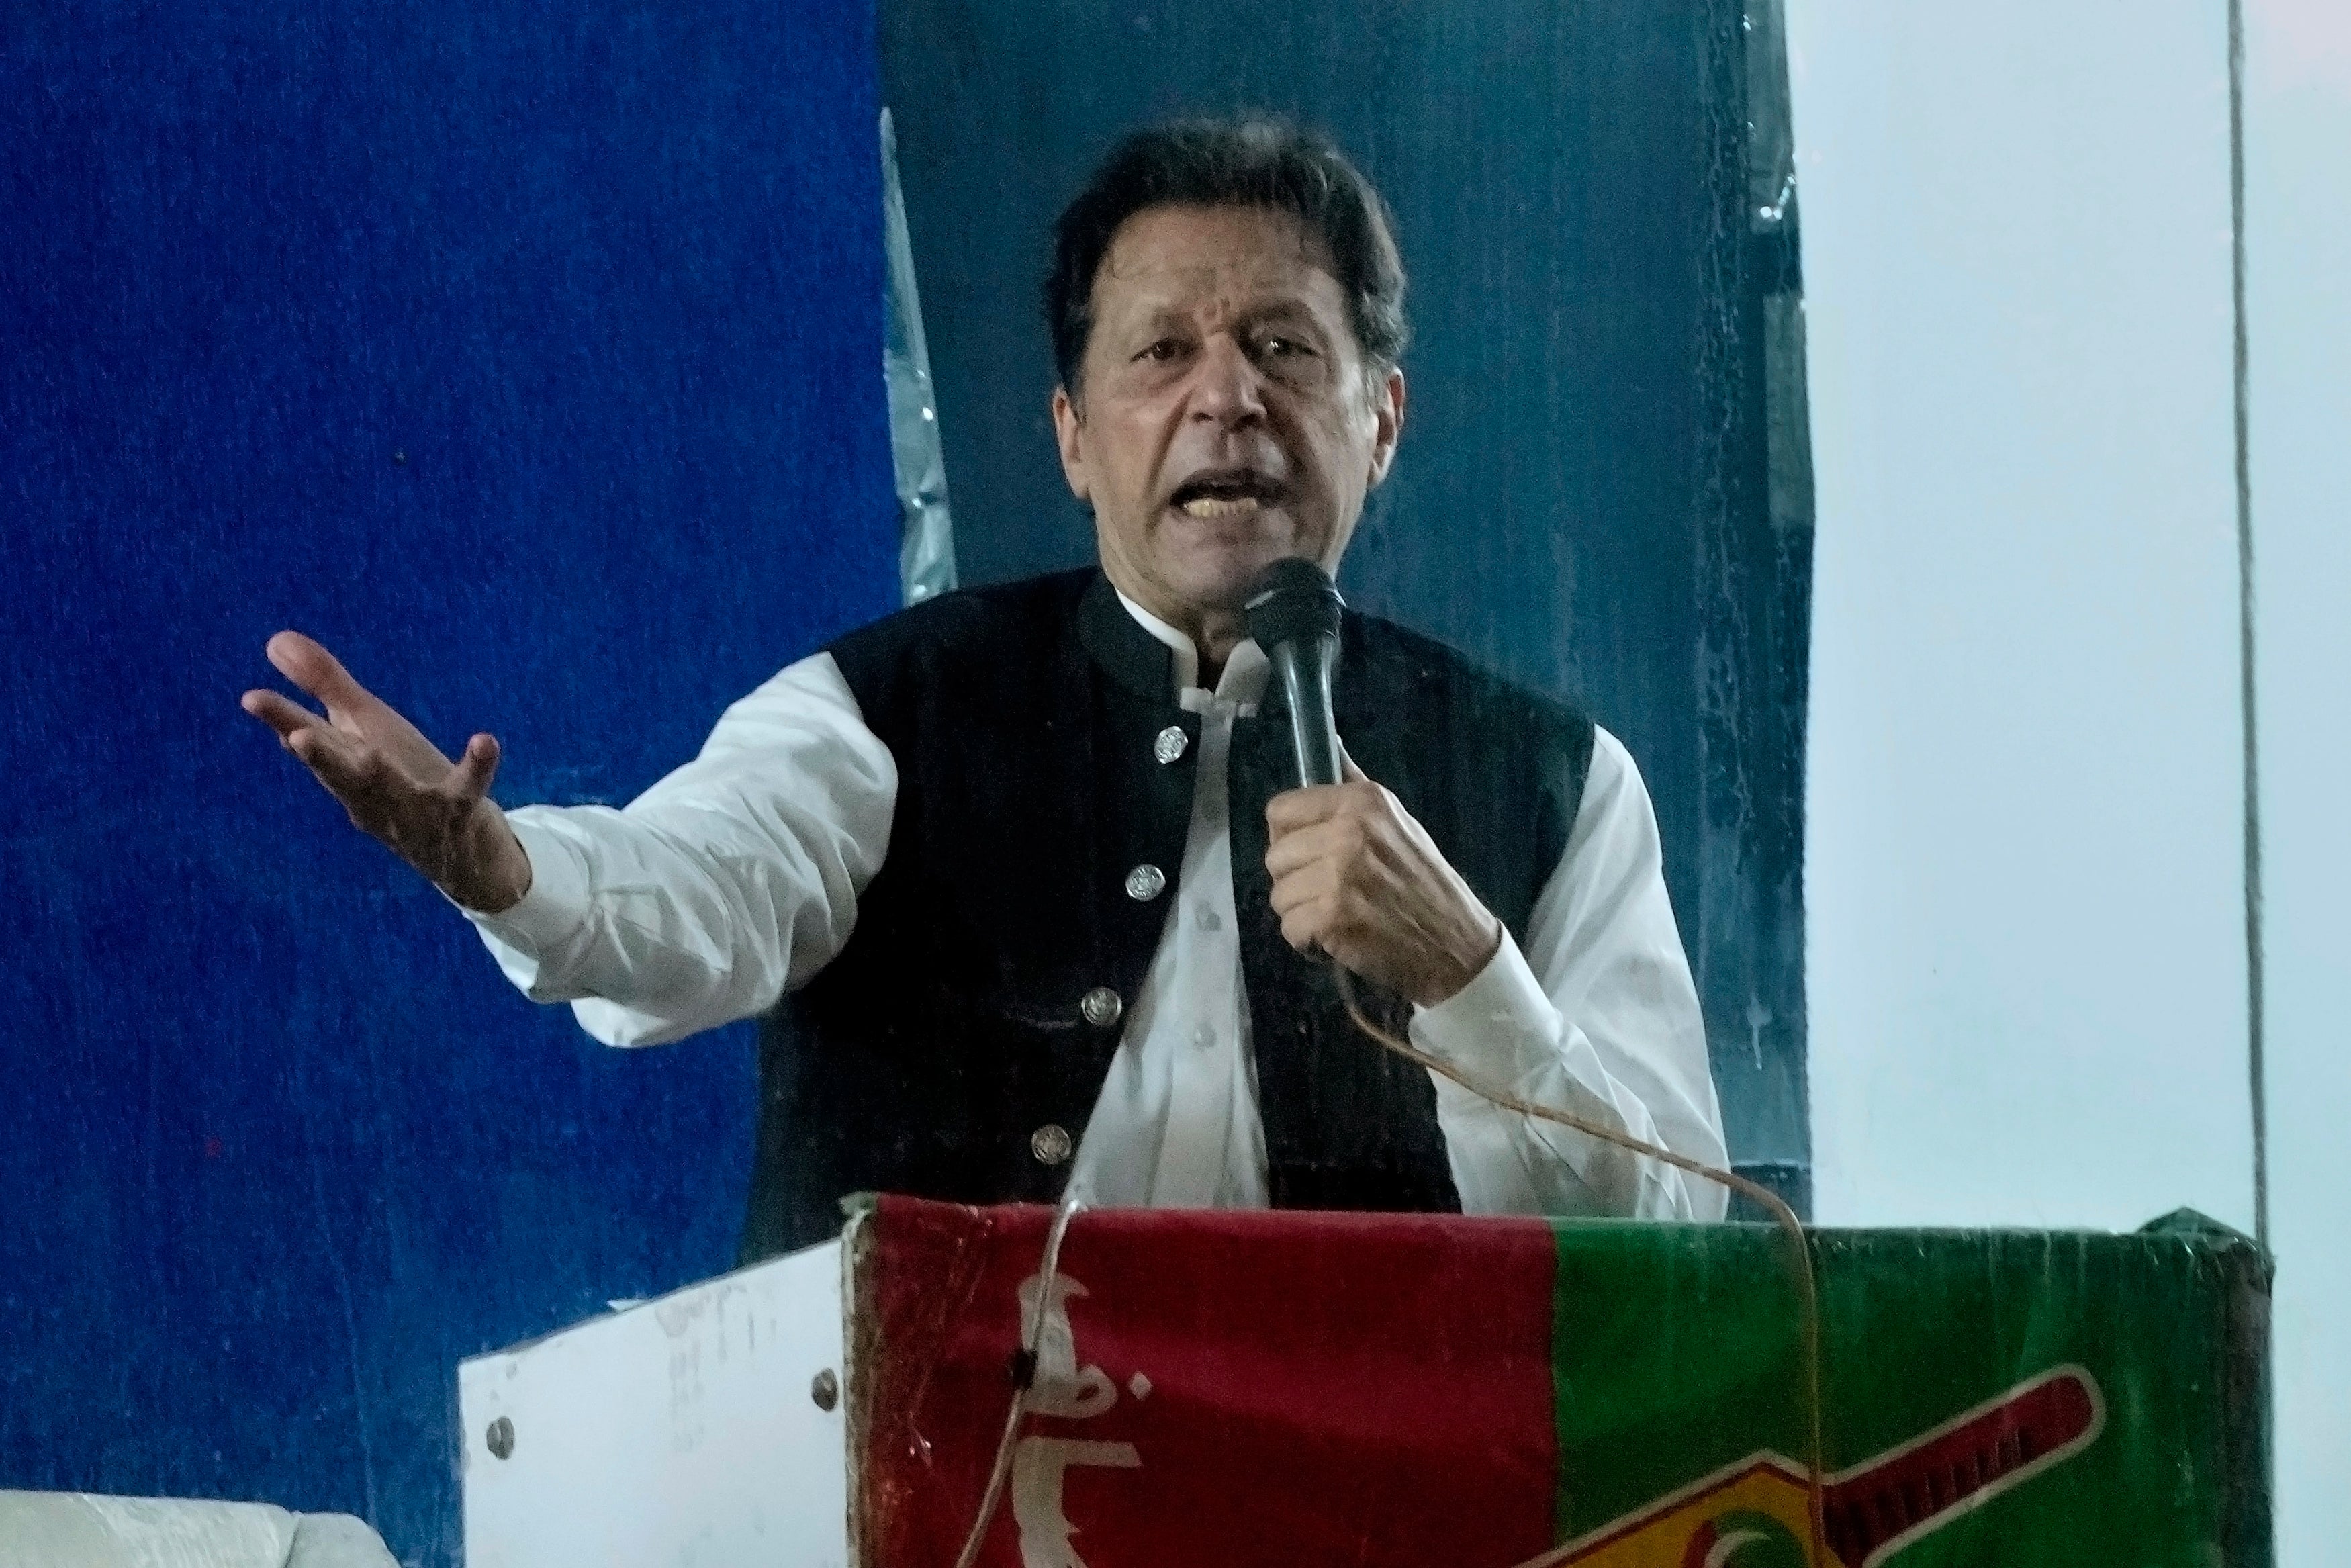 Protected by a bulletproof barrier, Imran Khan speaks during a rally in Lahore